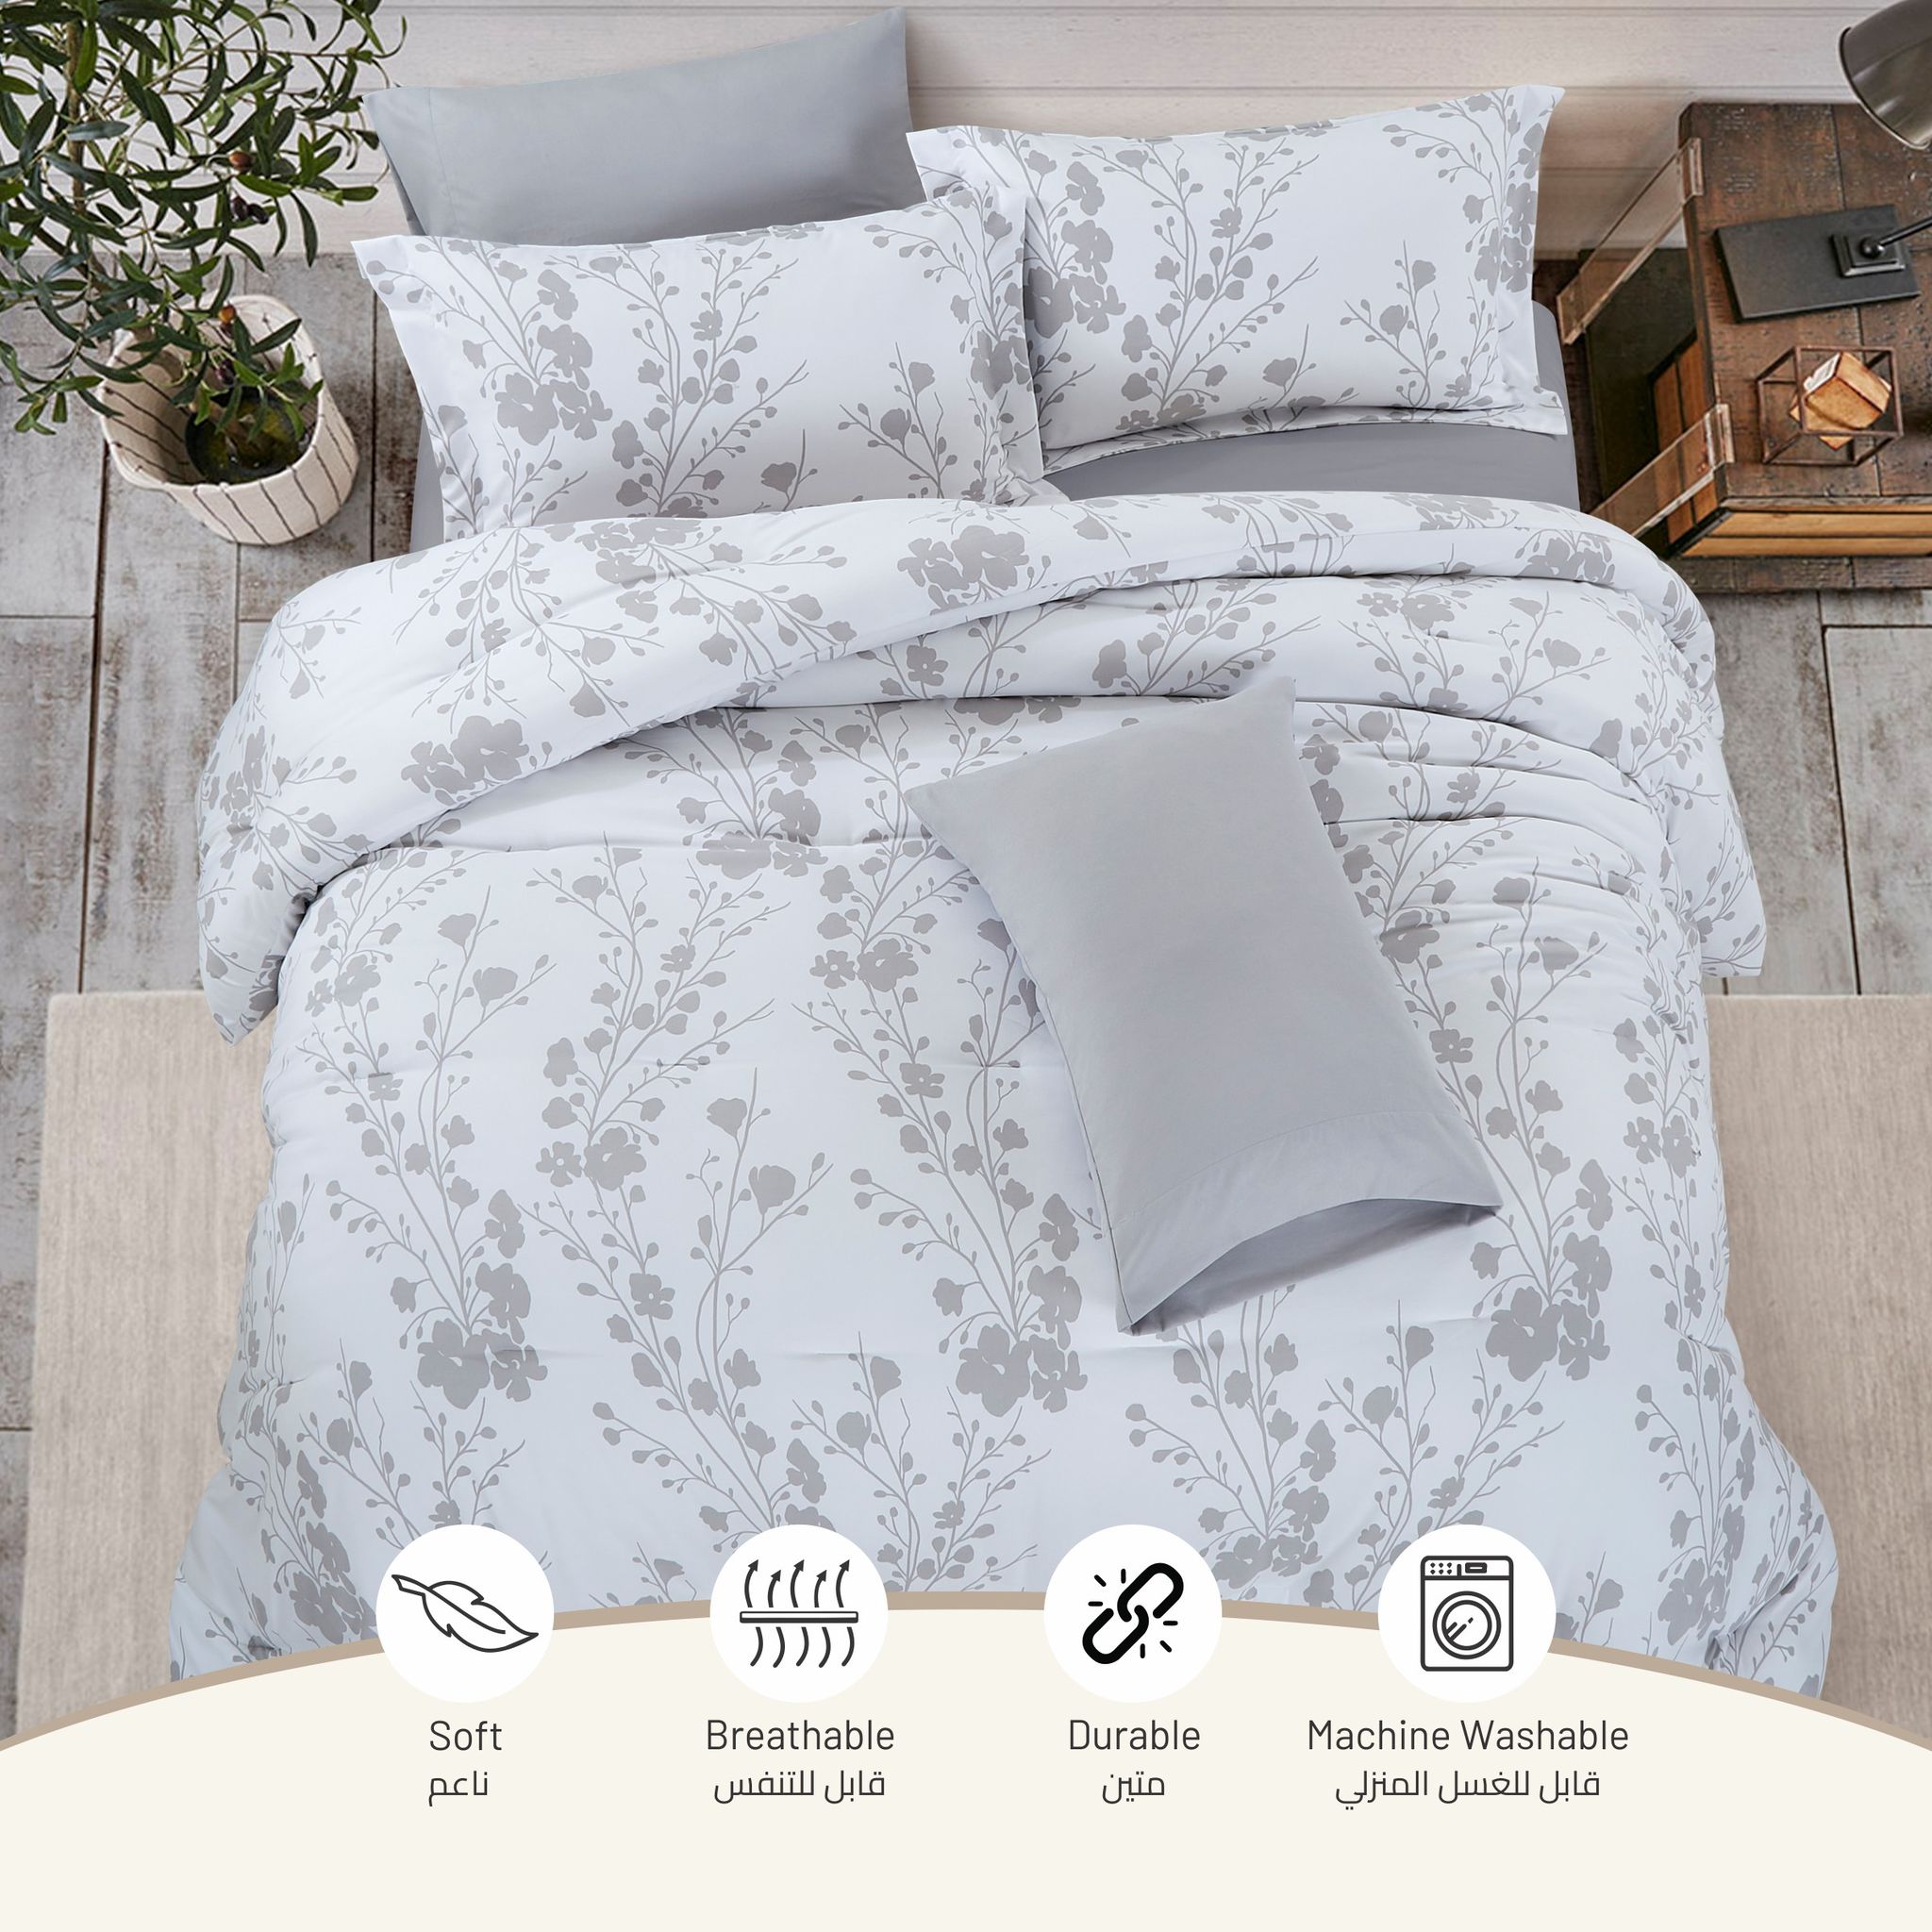 Printed Comforter Set 4-Pcs Queen Size Lightweight All Season Double Bed Bedding Set With Down Alternative Filling,White Silver